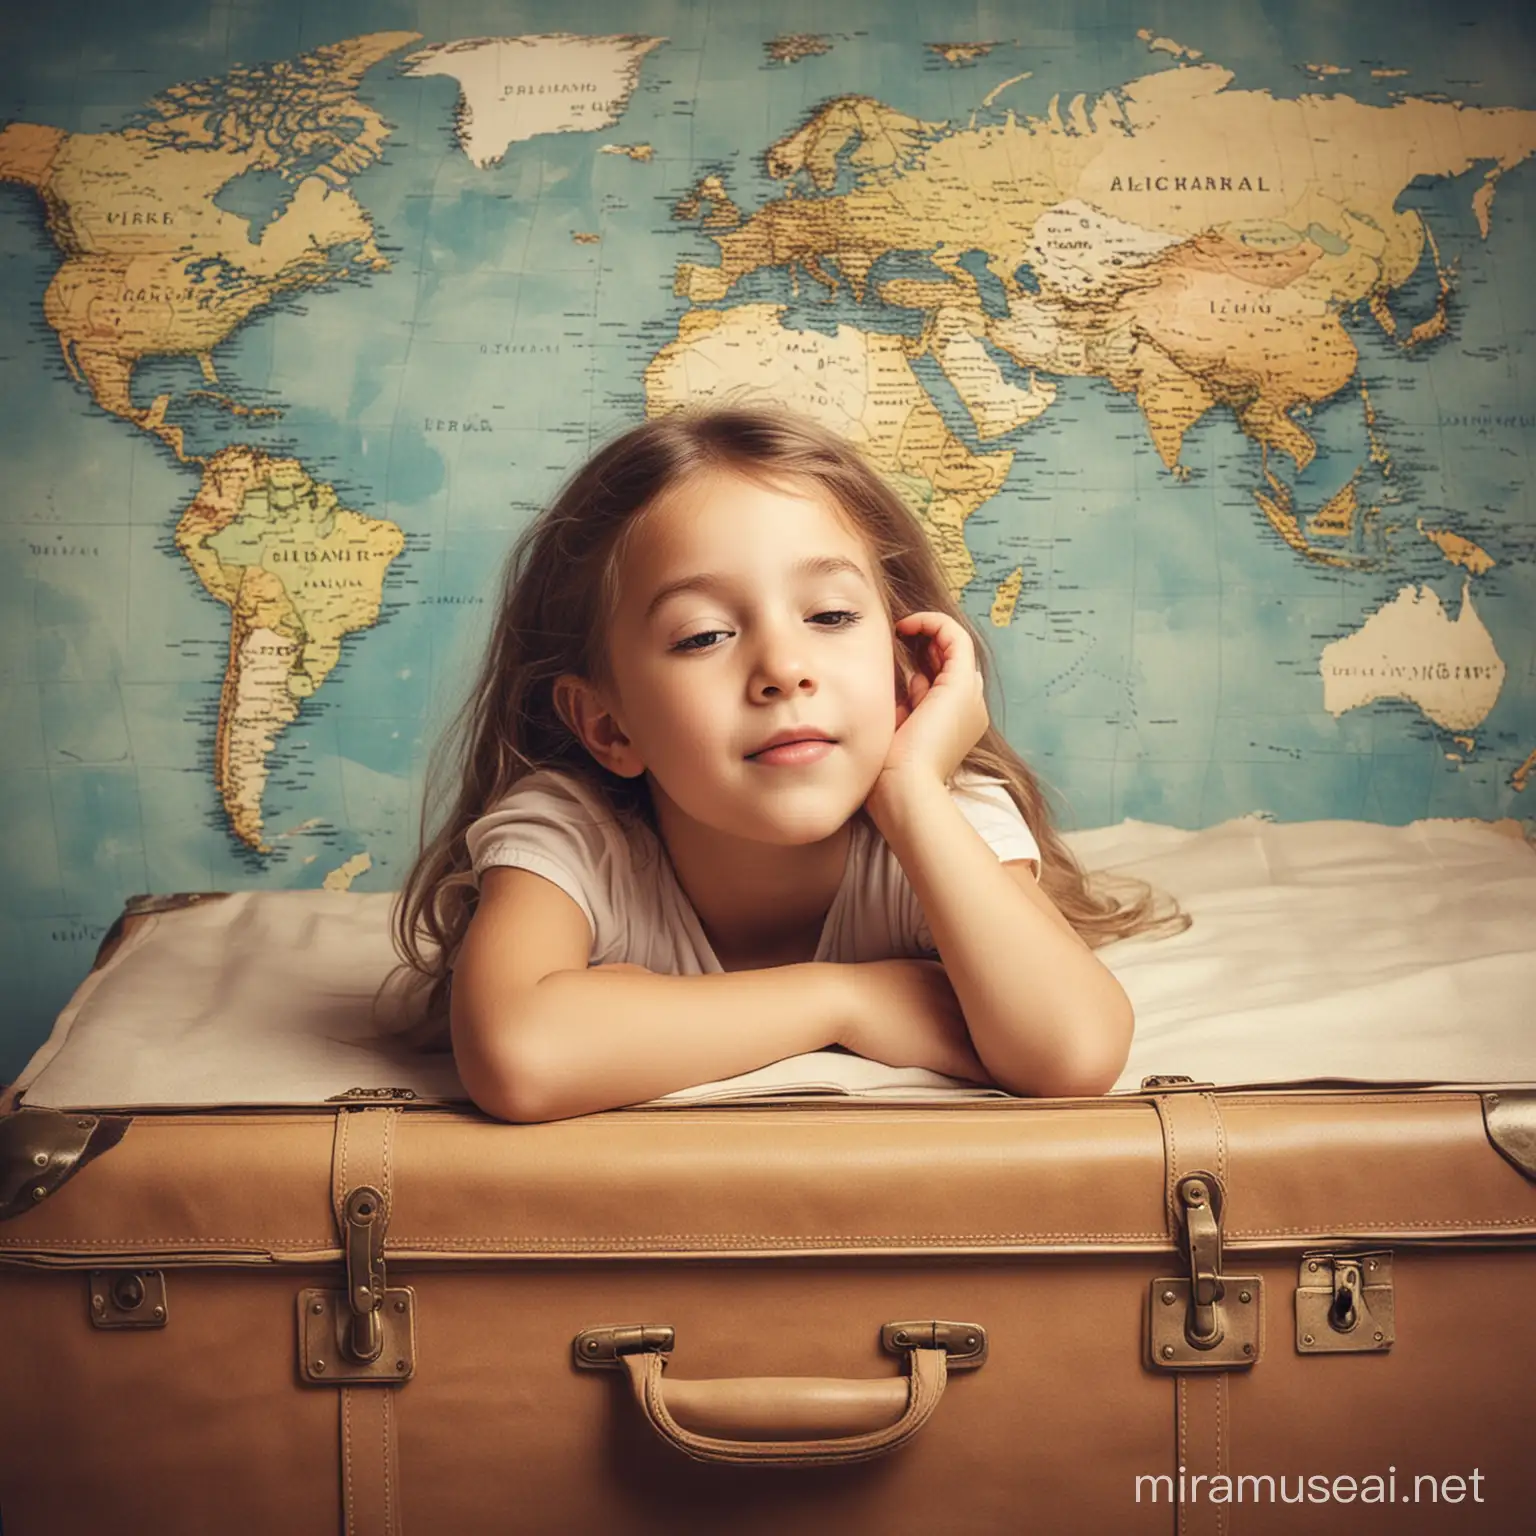 Young Girl Dreaming of Holiday Adventure